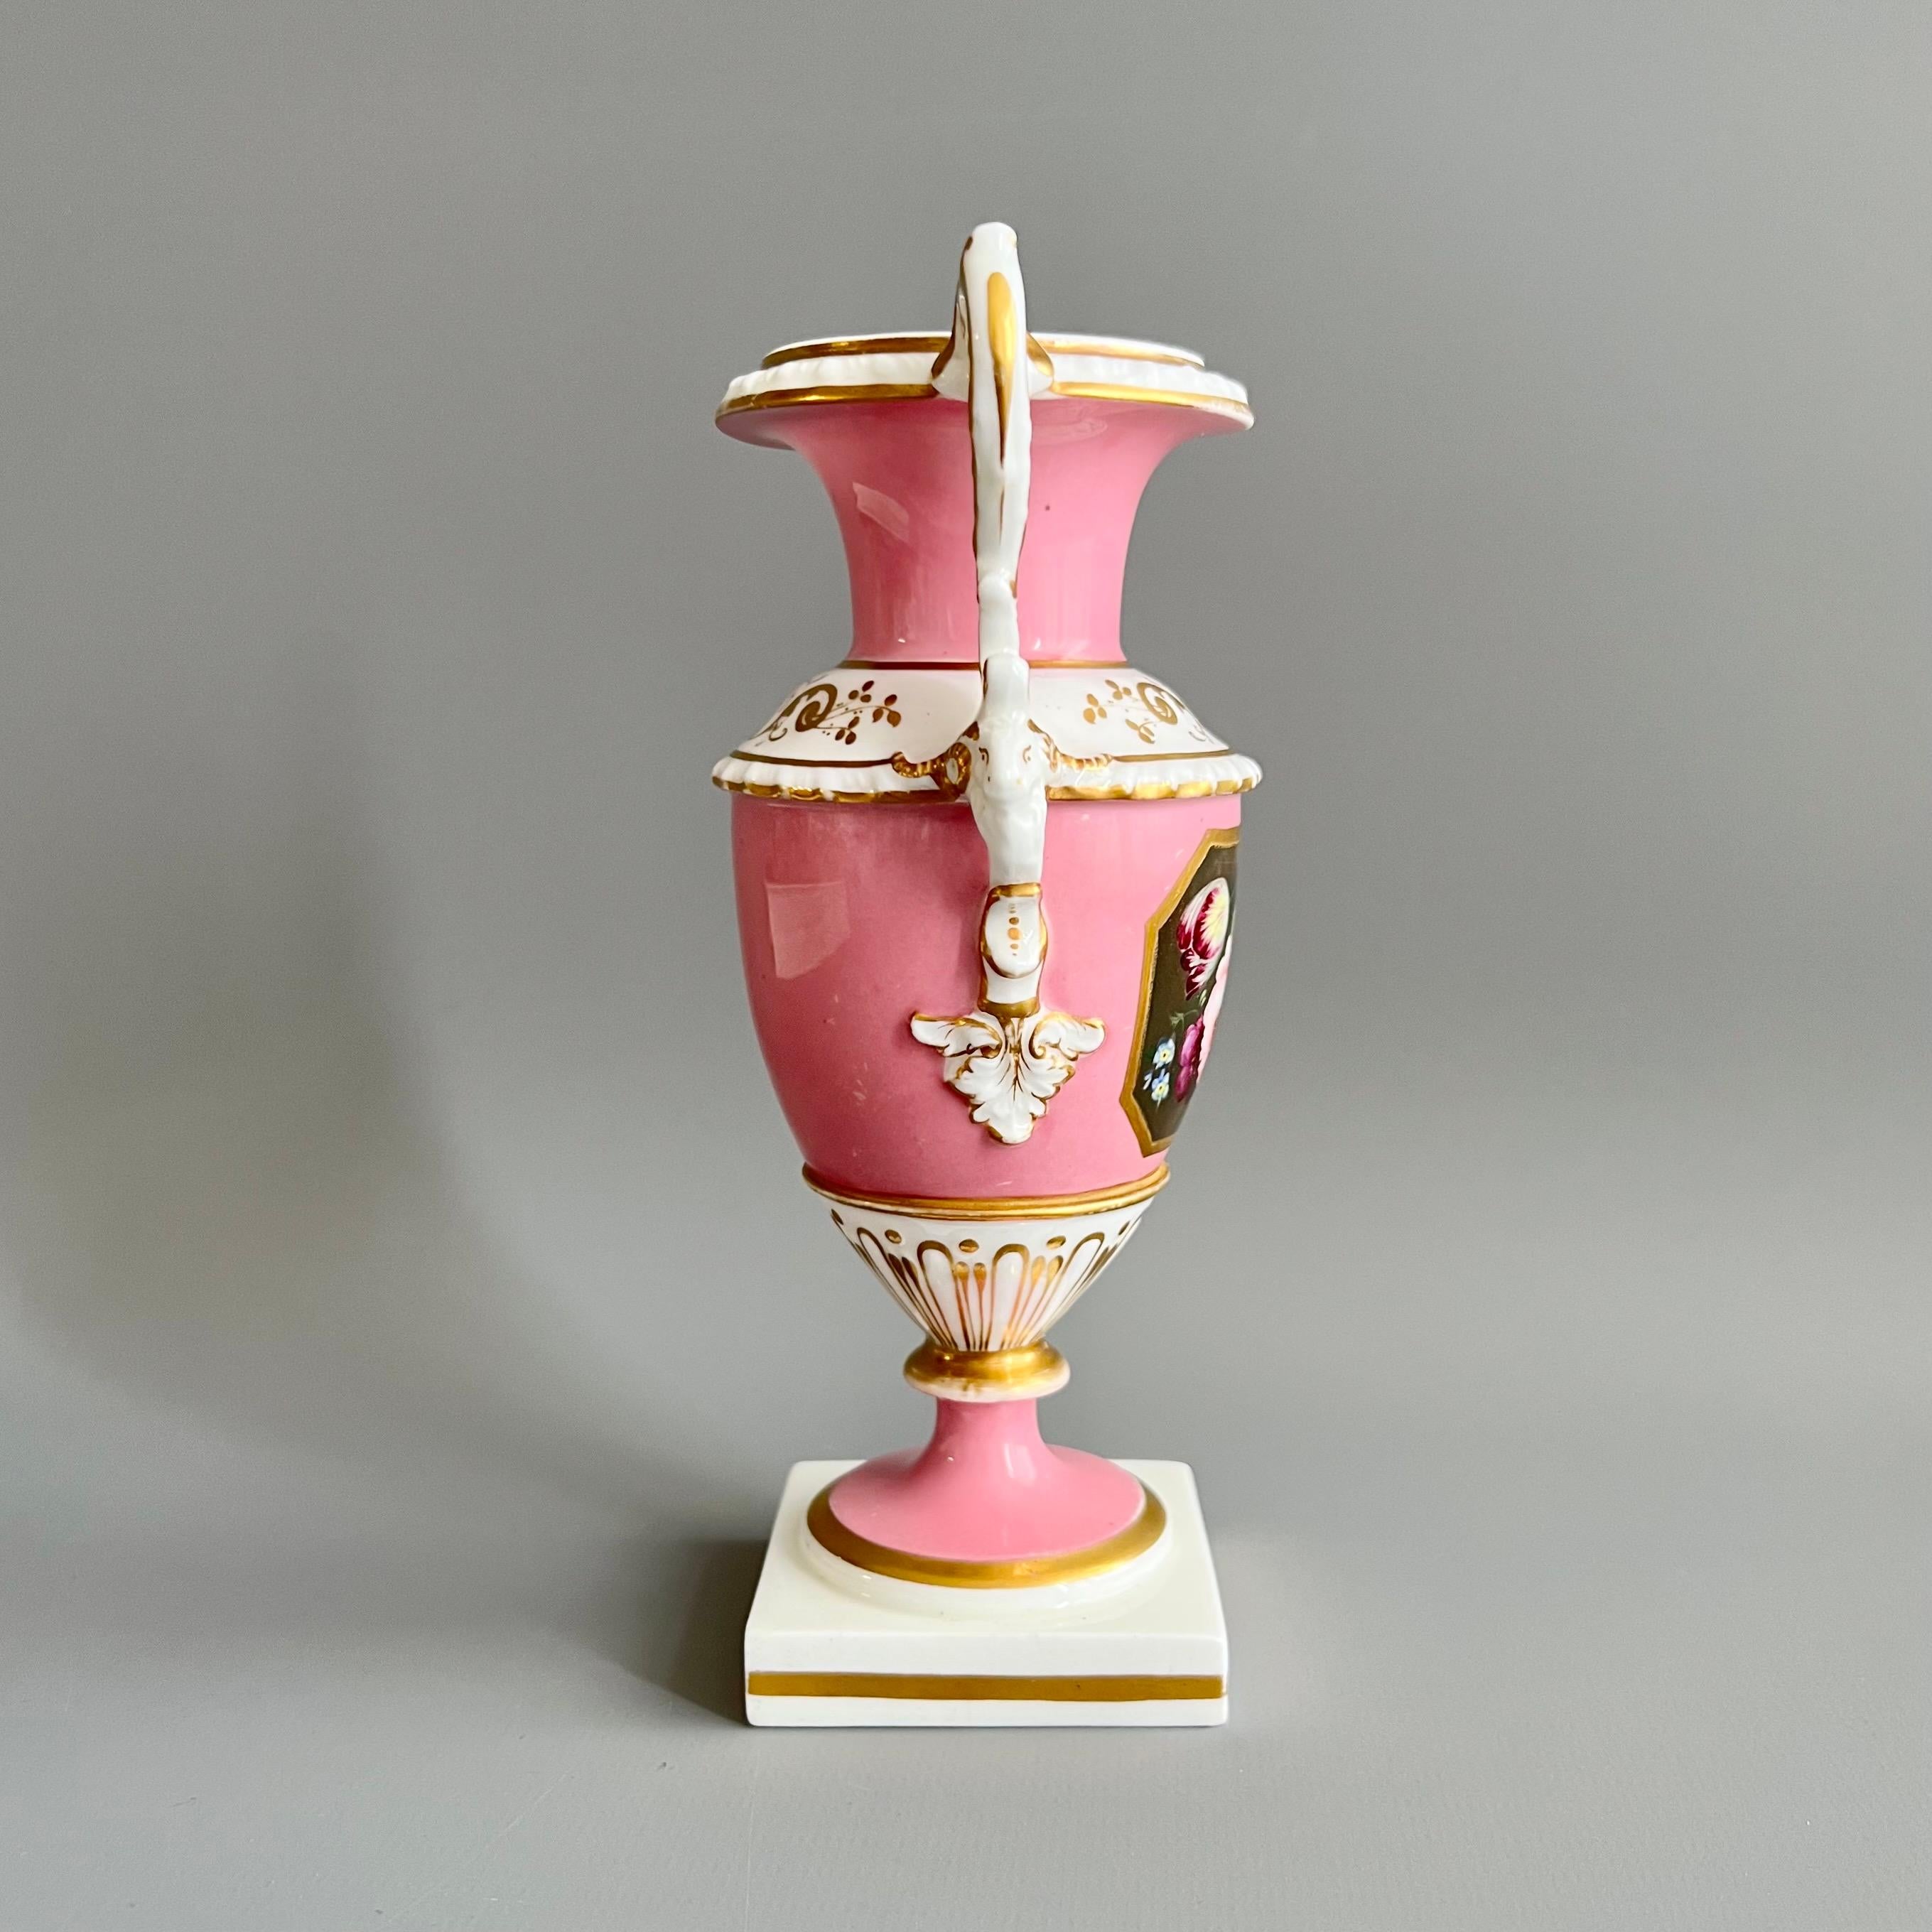 Mid-19th Century Minton Small Vase, Elgin Shape Pink with Floral Reserve, Rococo Revival ca 1835